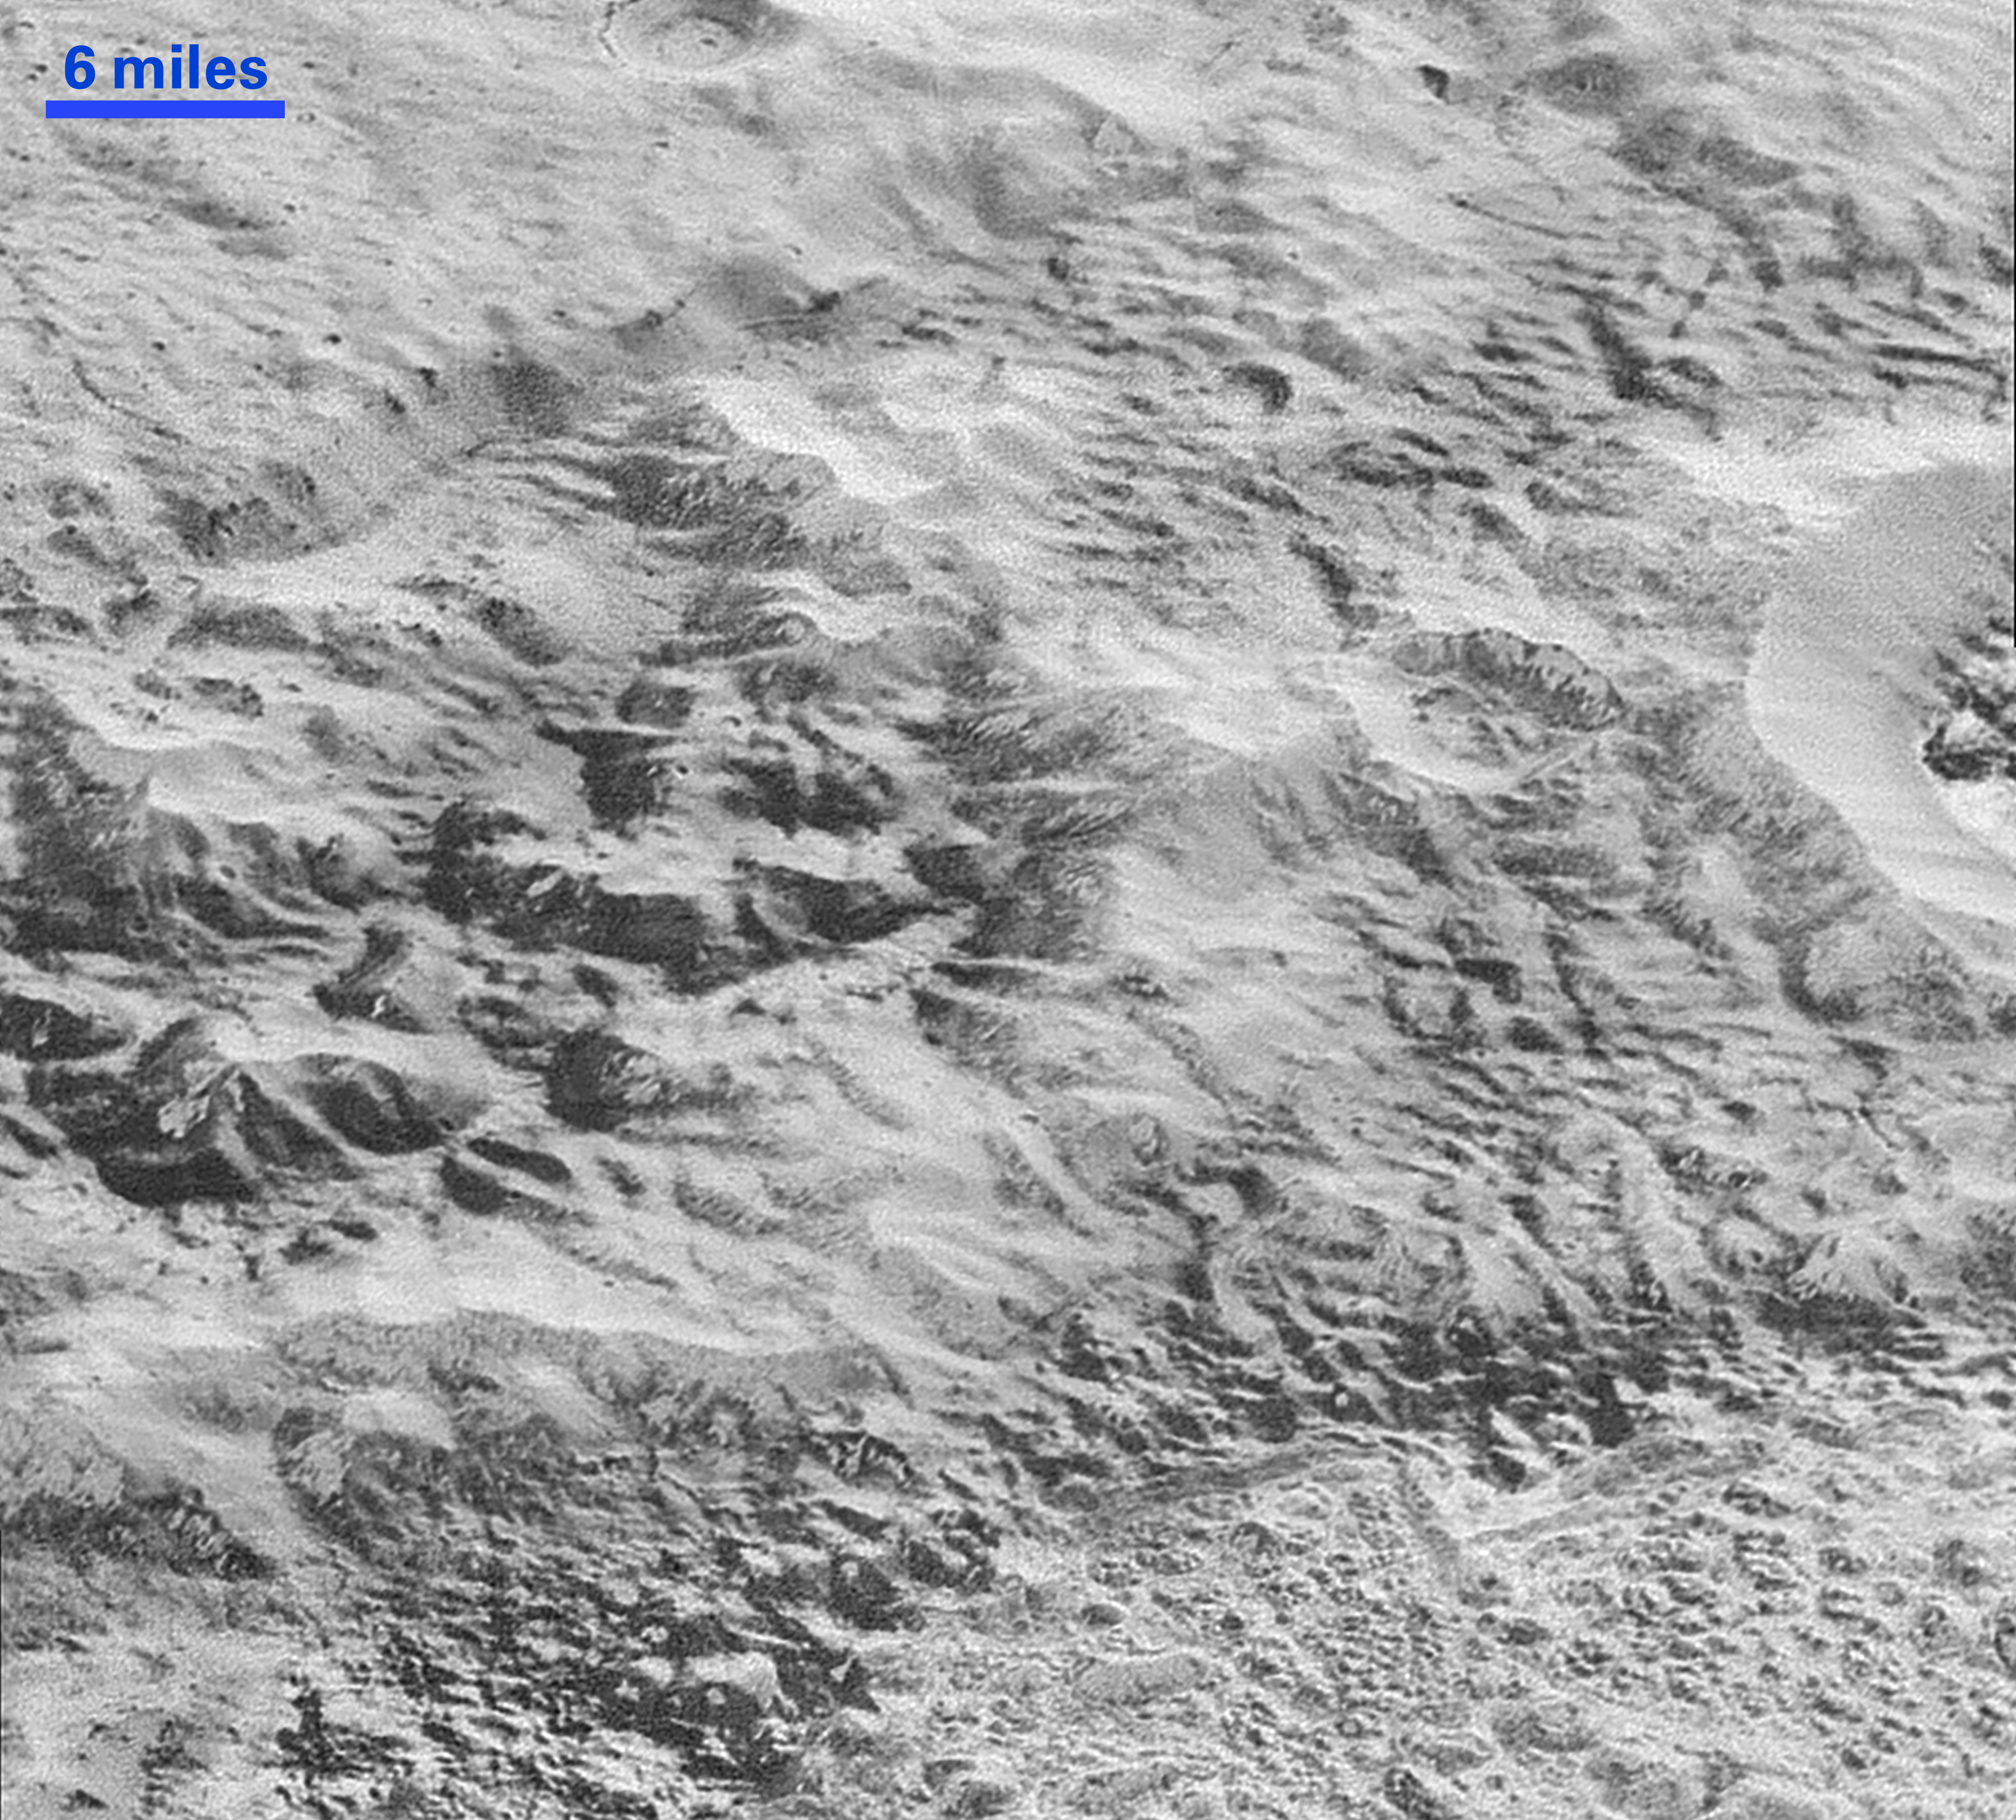 Pluto’s ‘Badlands’: This highest-resolution image from NASA’s New Horizons spacecraft shows how erosion and faulting have sculpted this portion of Pluto’s icy crust into rugged badlands topography. Credits: NASA/JHUAPL/SwRI